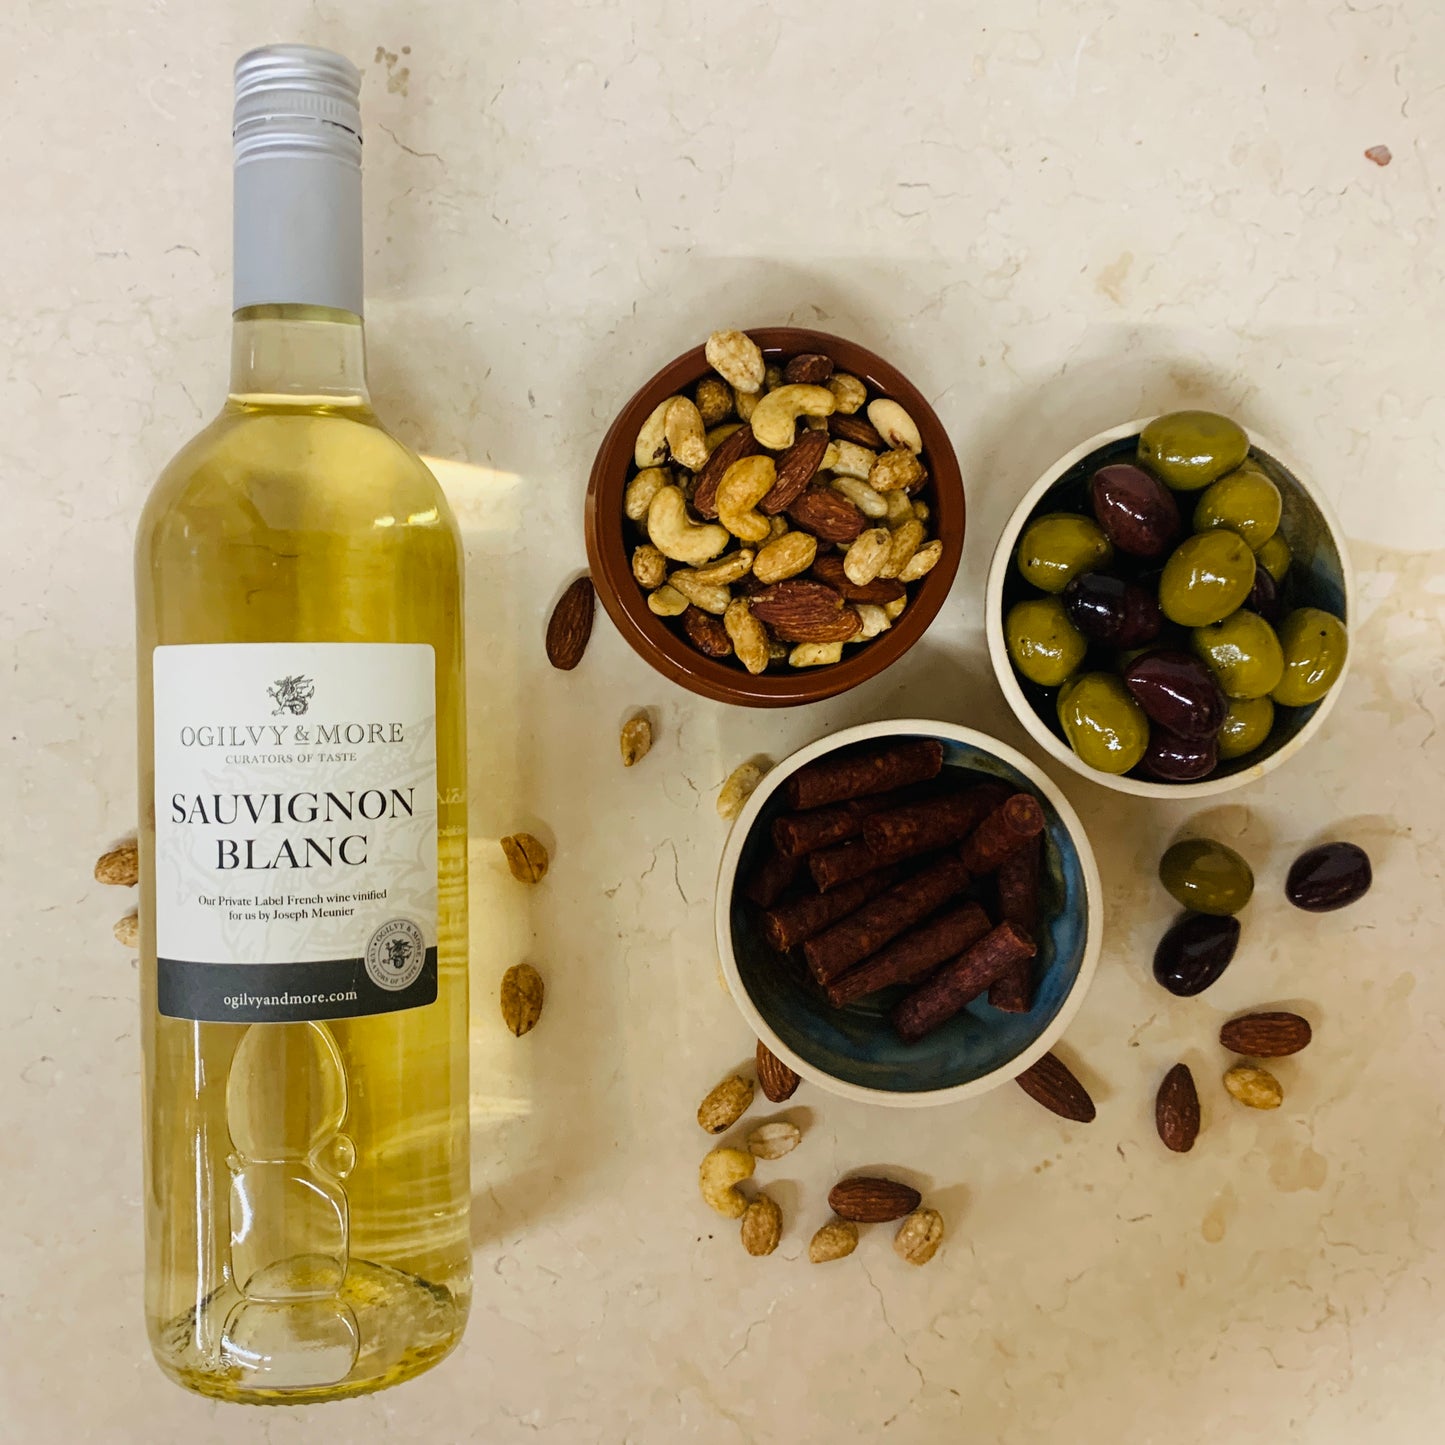 O&M Exclusive Wine and Nibbles Treat Pack